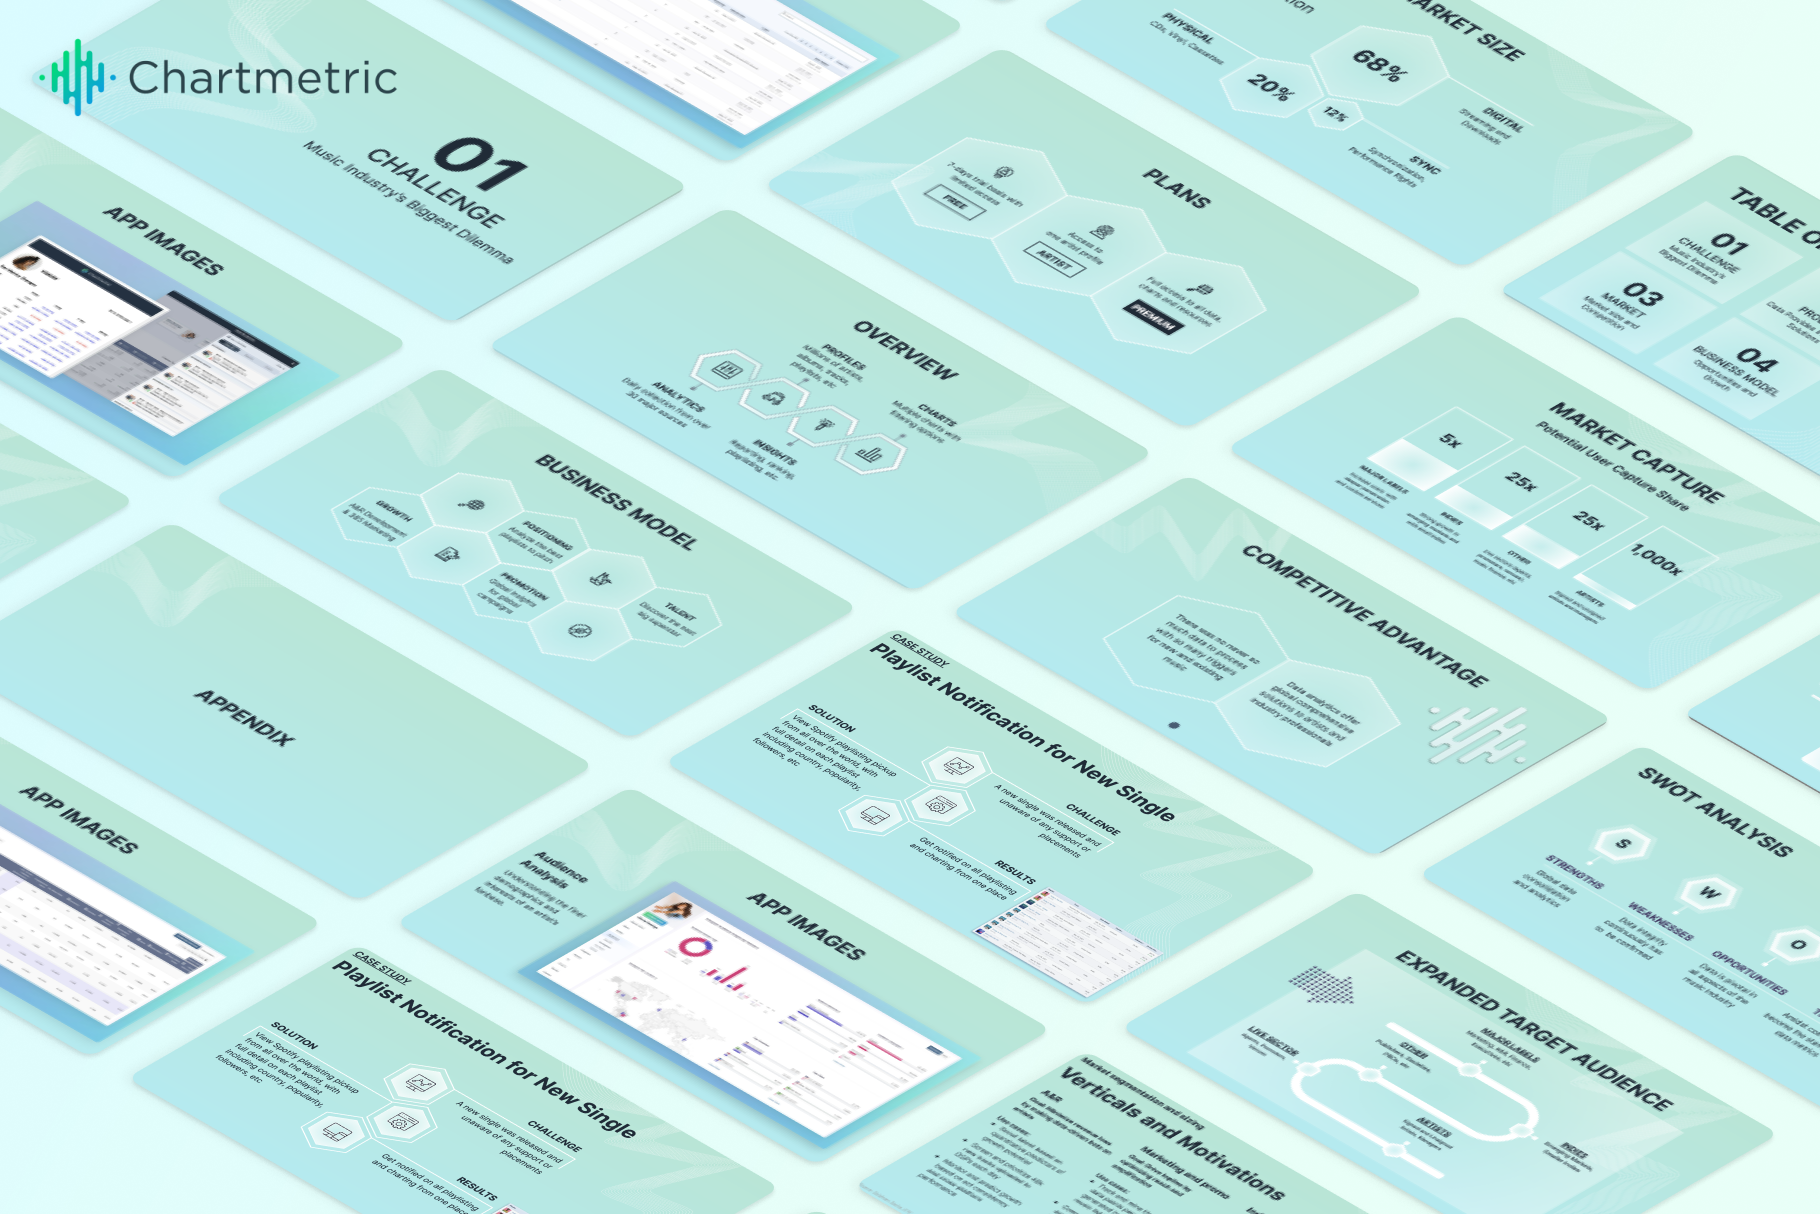 The pitch deck worth $2 million: how Chartmetric did it